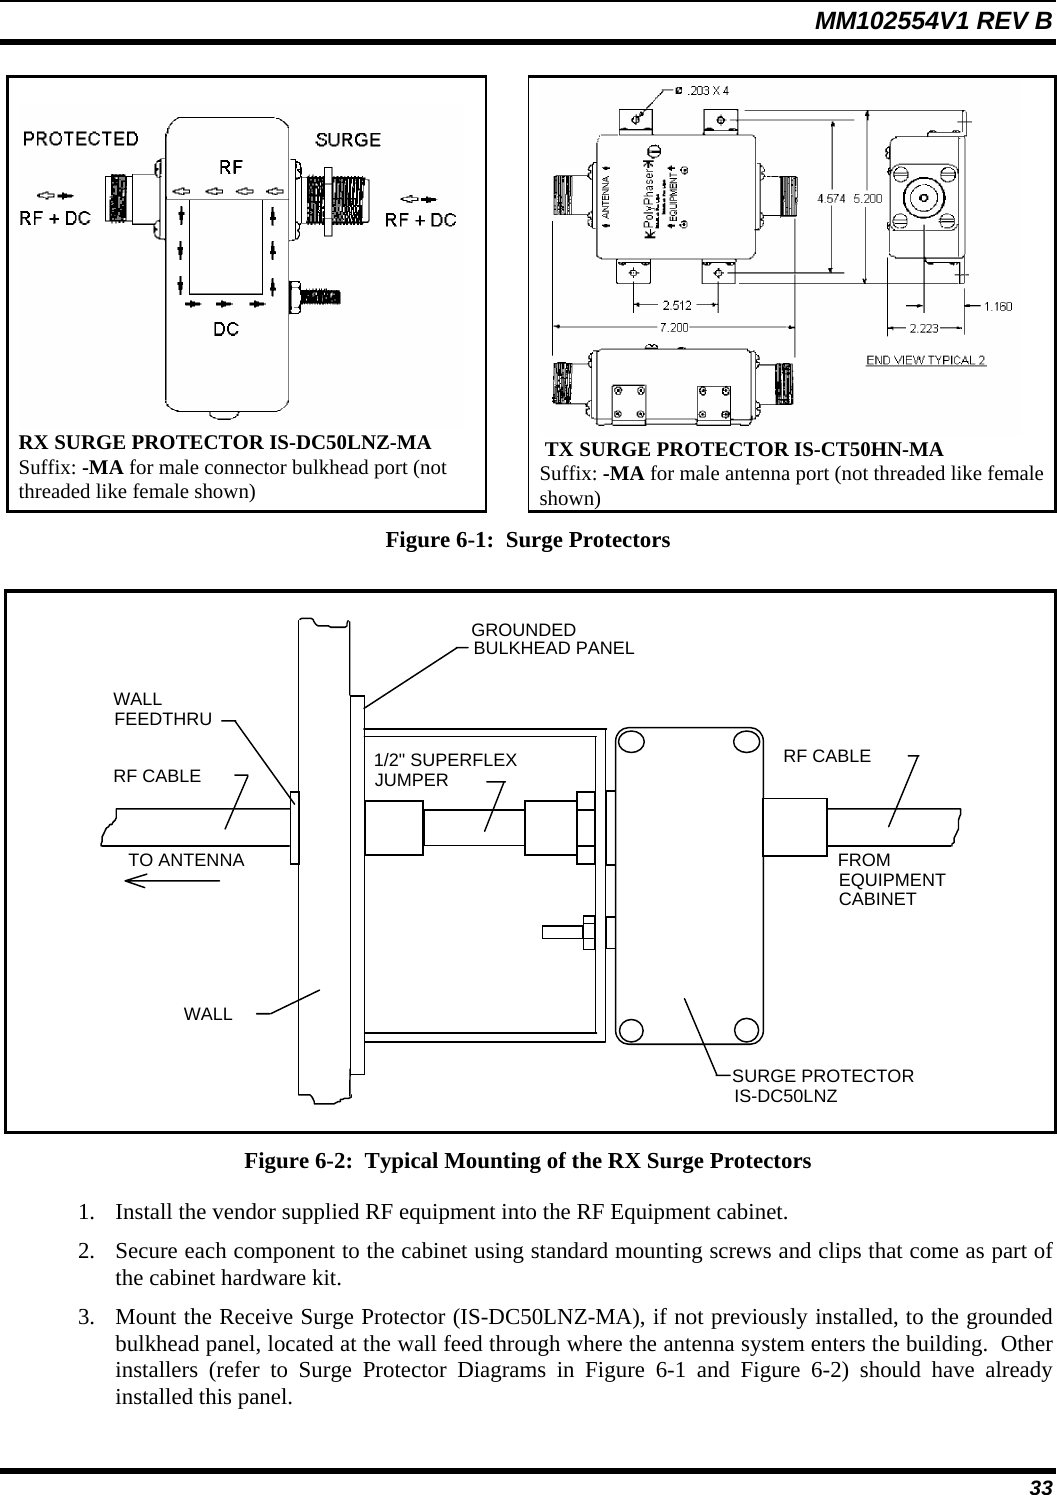 MM102554V1 REV B  33   RX SURGE PROTECTOR IS-DC50LNZ-MA Suffix: -MA for male connector bulkhead port (not threaded like female shown)   TX SURGE PROTECTOR IS-CT50HN-MA Suffix: -MA for male antenna port (not threaded like female shown) Figure 6-1:  Surge Protectors   GROUNDEDBULKHEAD PANELIS-DC50LNZSURGE PROTECTORWALLFEEDTHRURF CABLE 1/2&quot; SUPERFLEXJUMPERWALLTO ANTENNARF CABLEFROMEQUIPMENTCABINET  Figure 6-2:  Typical Mounting of the RX Surge Protectors 1. Install the vendor supplied RF equipment into the RF Equipment cabinet.  2. Secure each component to the cabinet using standard mounting screws and clips that come as part of the cabinet hardware kit. 3. Mount the Receive Surge Protector (IS-DC50LNZ-MA), if not previously installed, to the grounded bulkhead panel, located at the wall feed through where the antenna system enters the building.  Other installers (refer to Surge Protector Diagrams in Figure 6-1 and Figure 6-2) should have already installed this panel. 